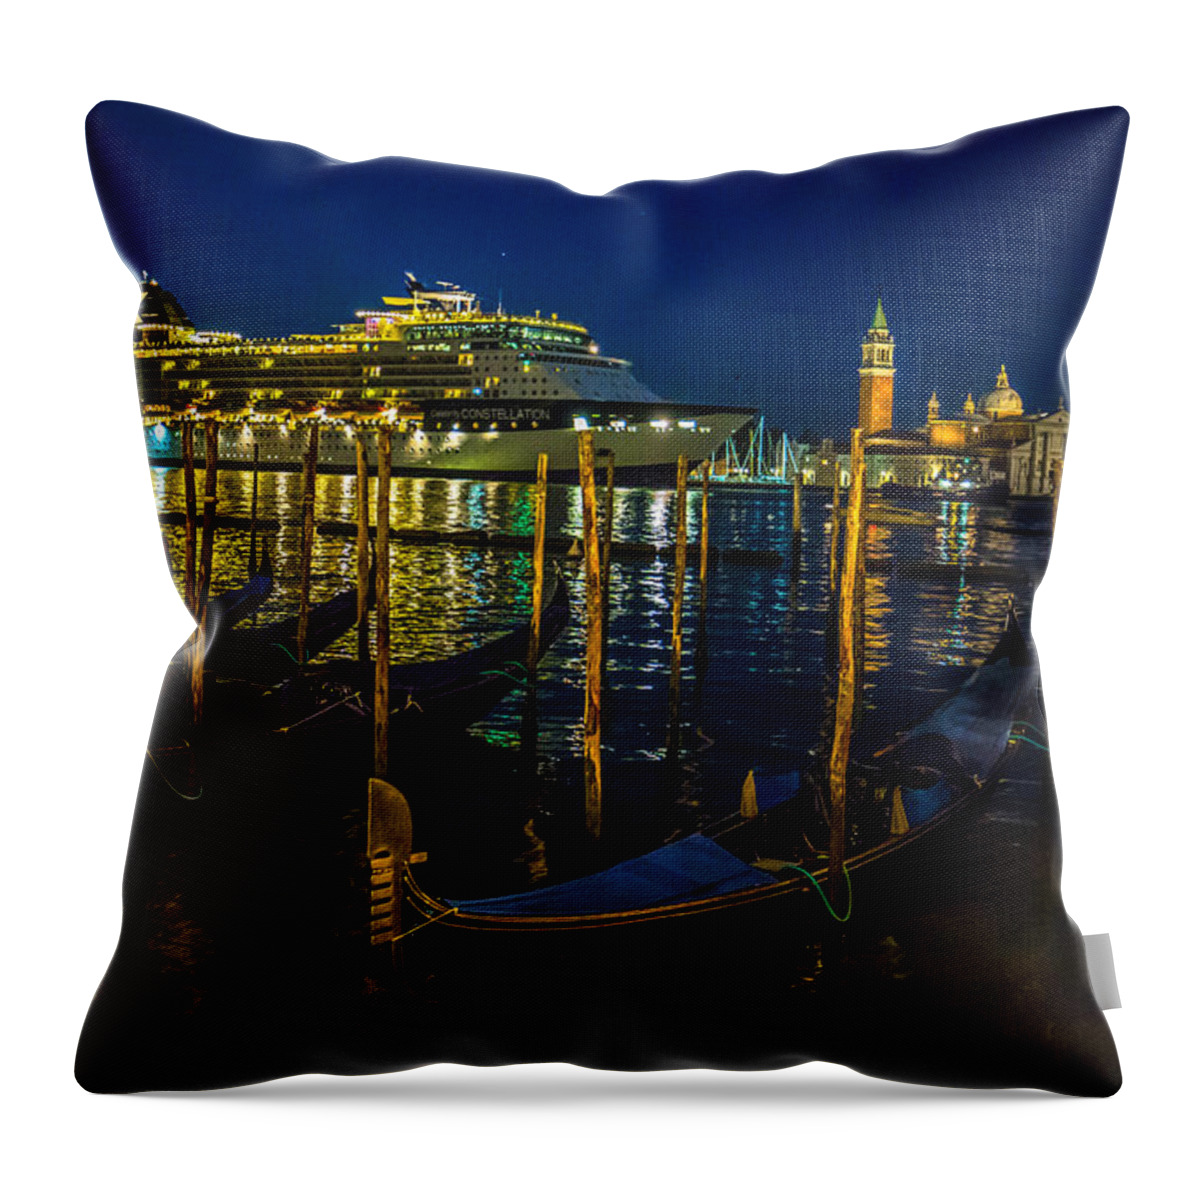 Venice Throw Pillow featuring the photograph Cruise Ship Entering Venice at Sunrise by Lev Kaytsner